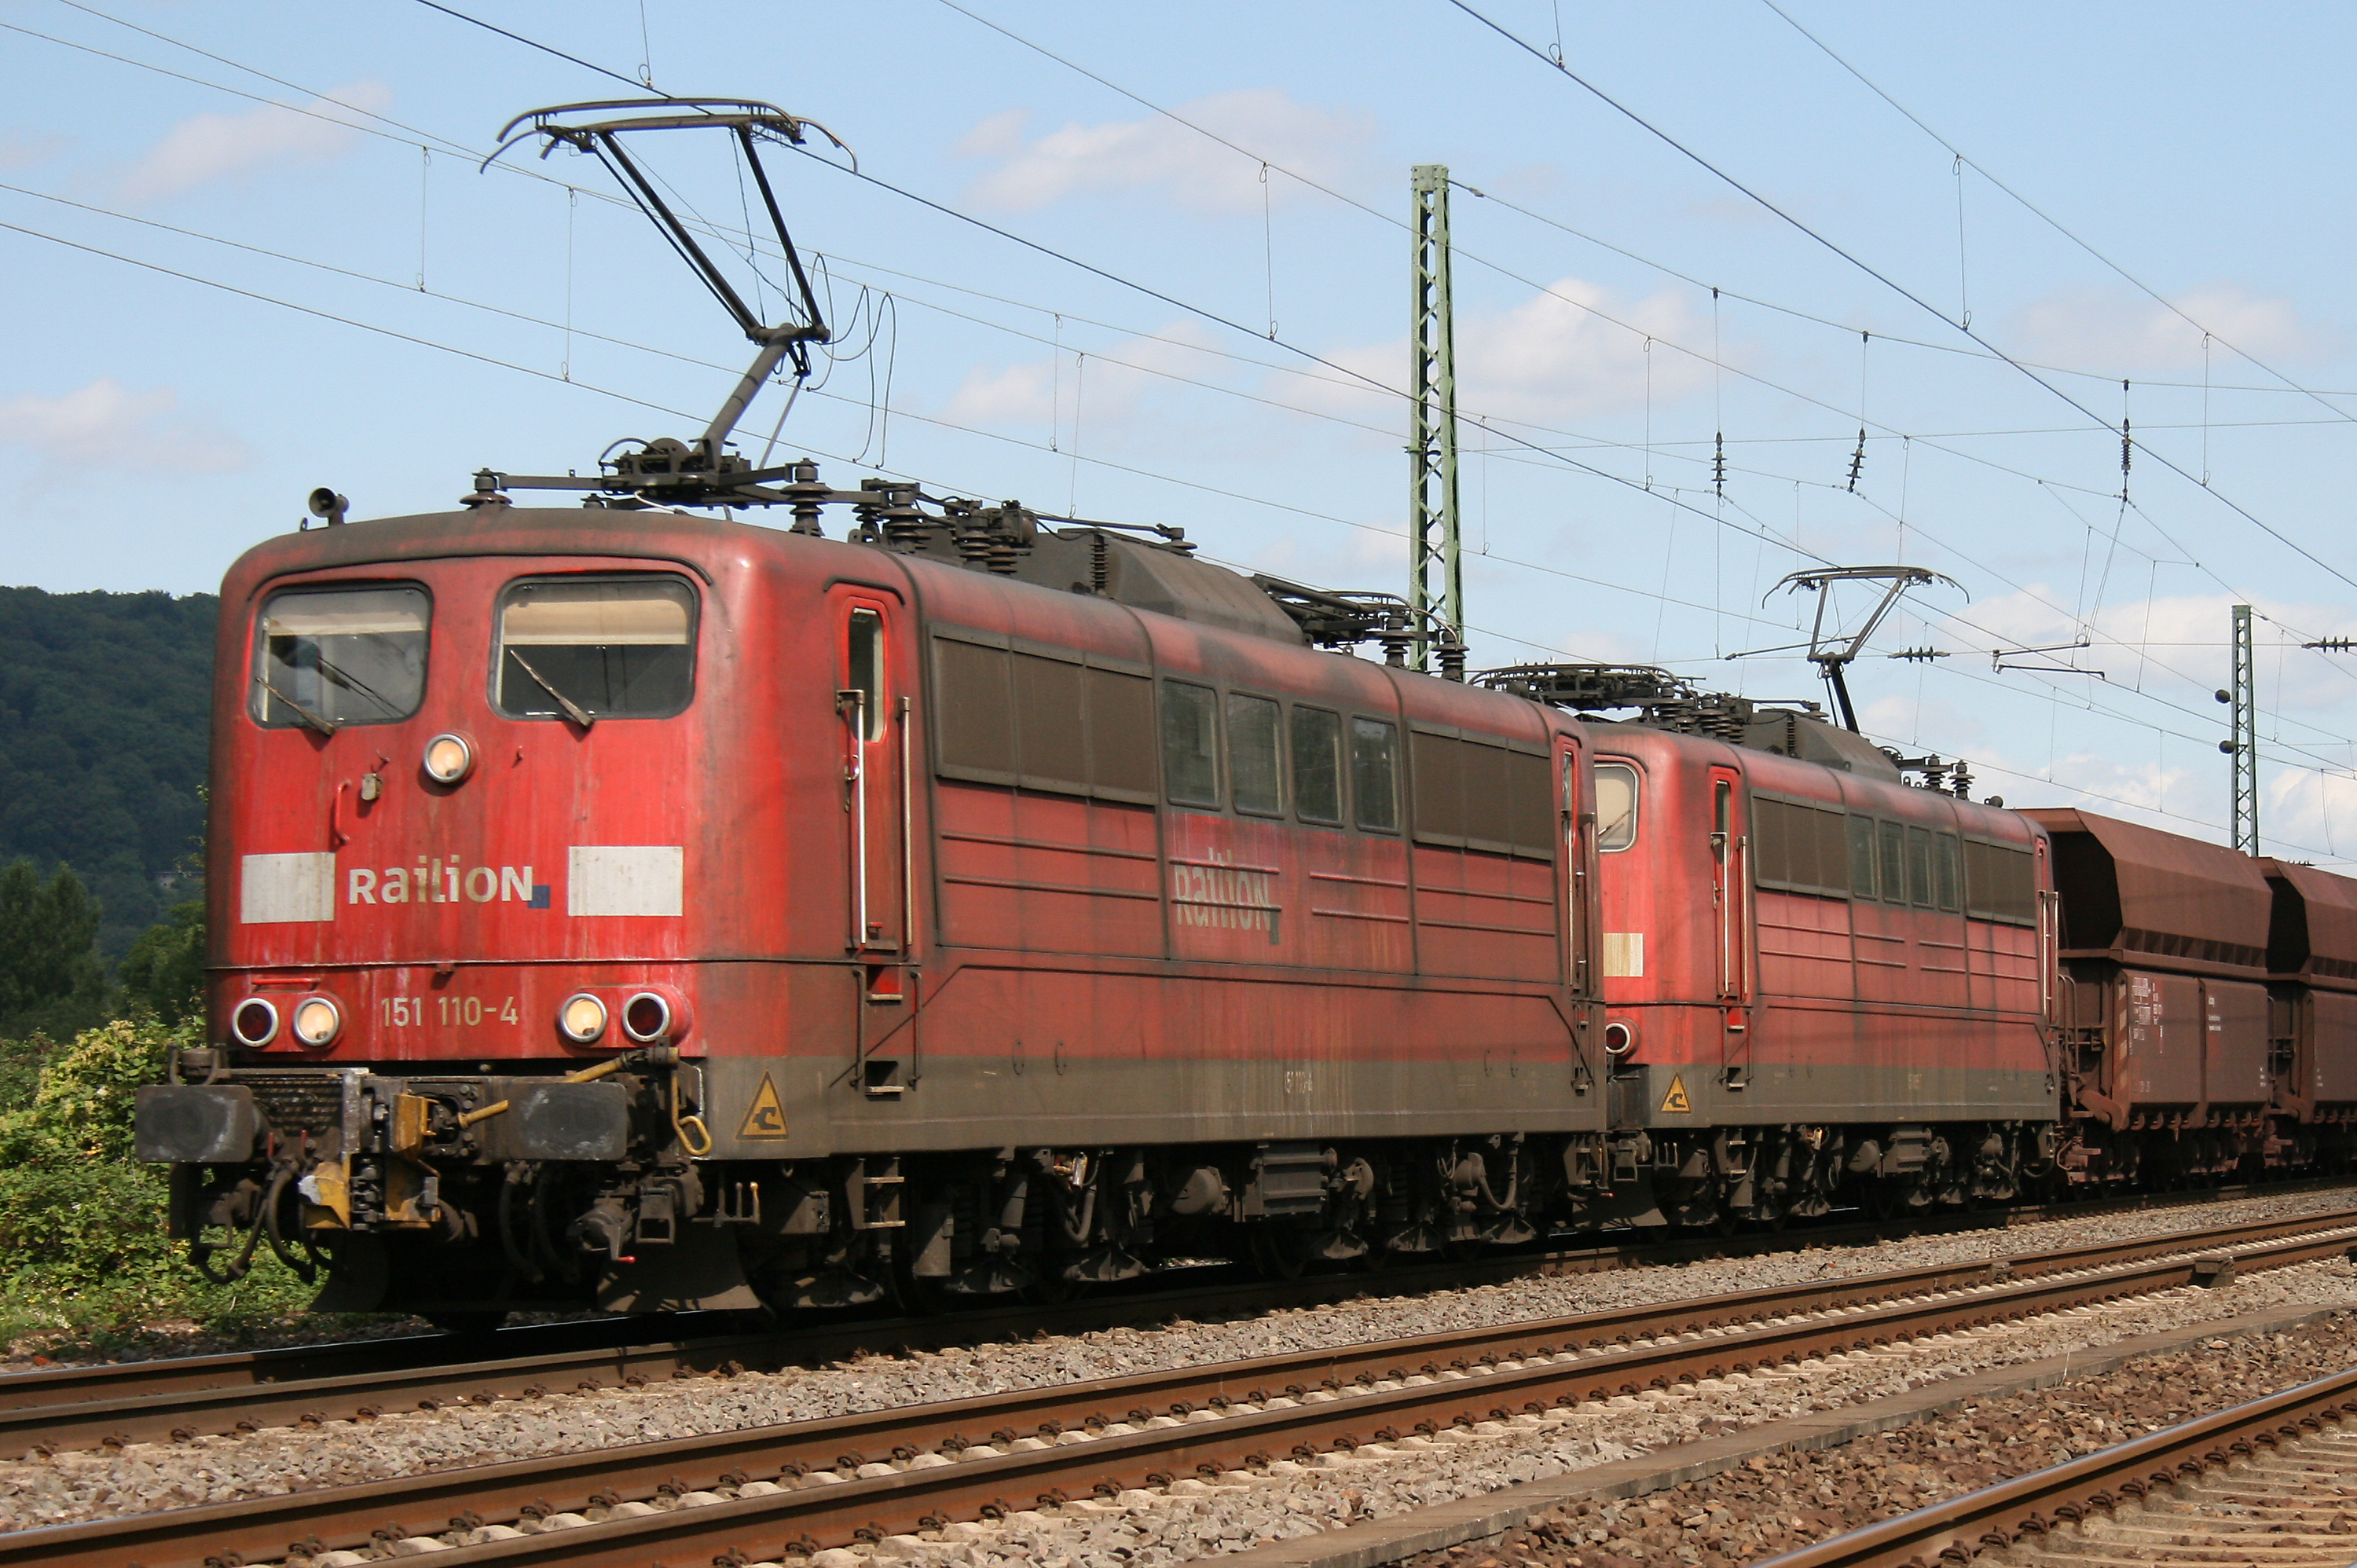 Class 151 electric locomotive equipped with AK69 automatic couplers